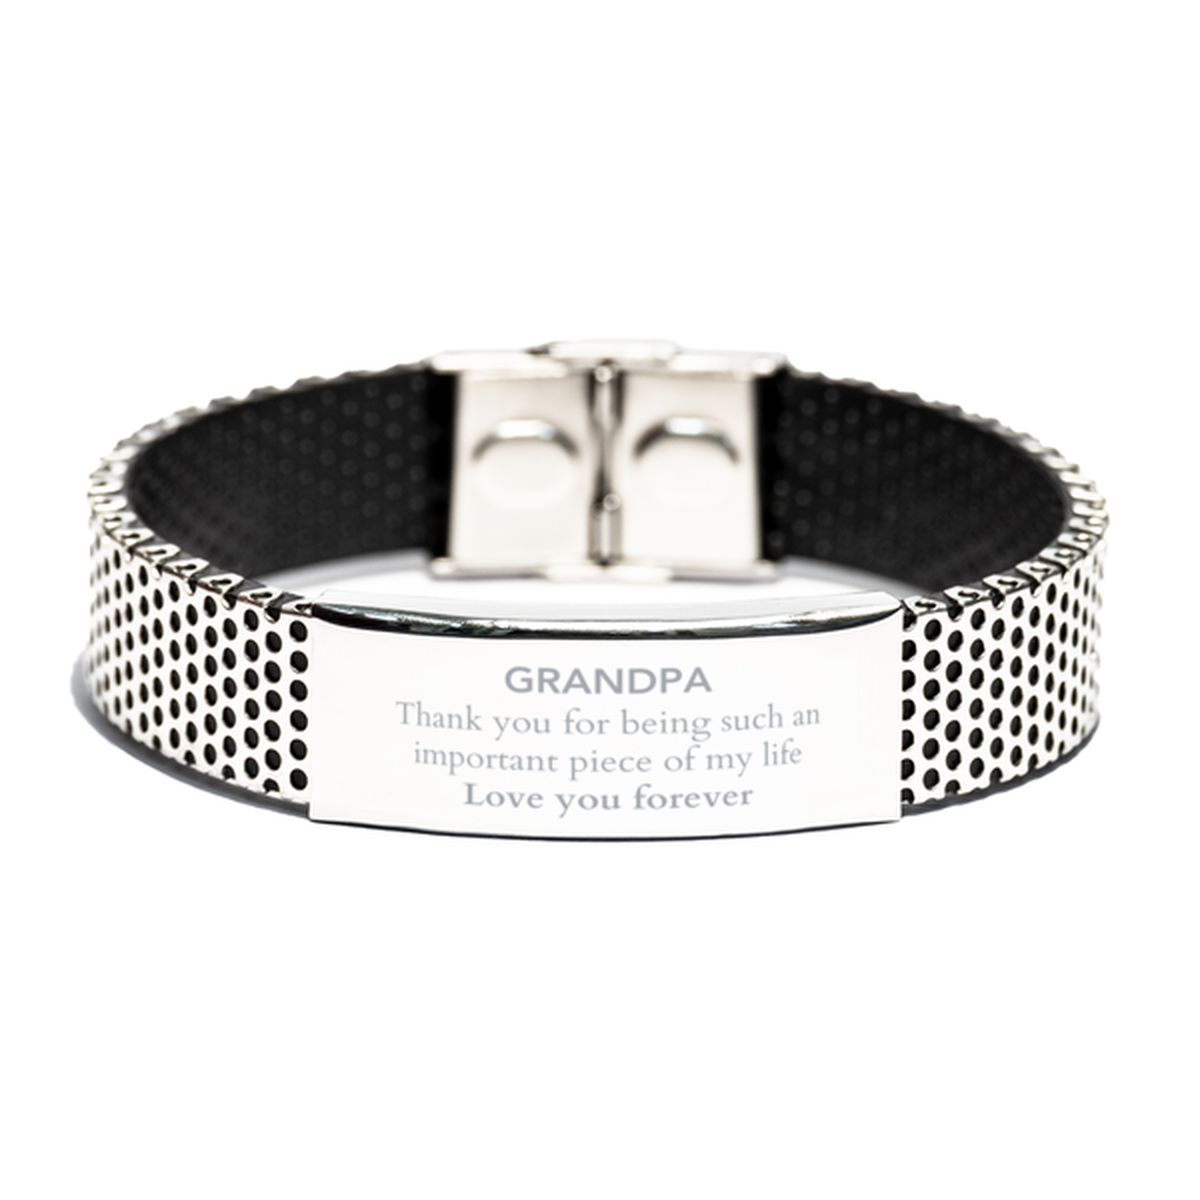 Appropriate Grandpa Stainless Steel Bracelet Epic Birthday Gifts for Grandpa Thank you for being such an important piece of my life Grandpa Christmas Mothers Fathers Day